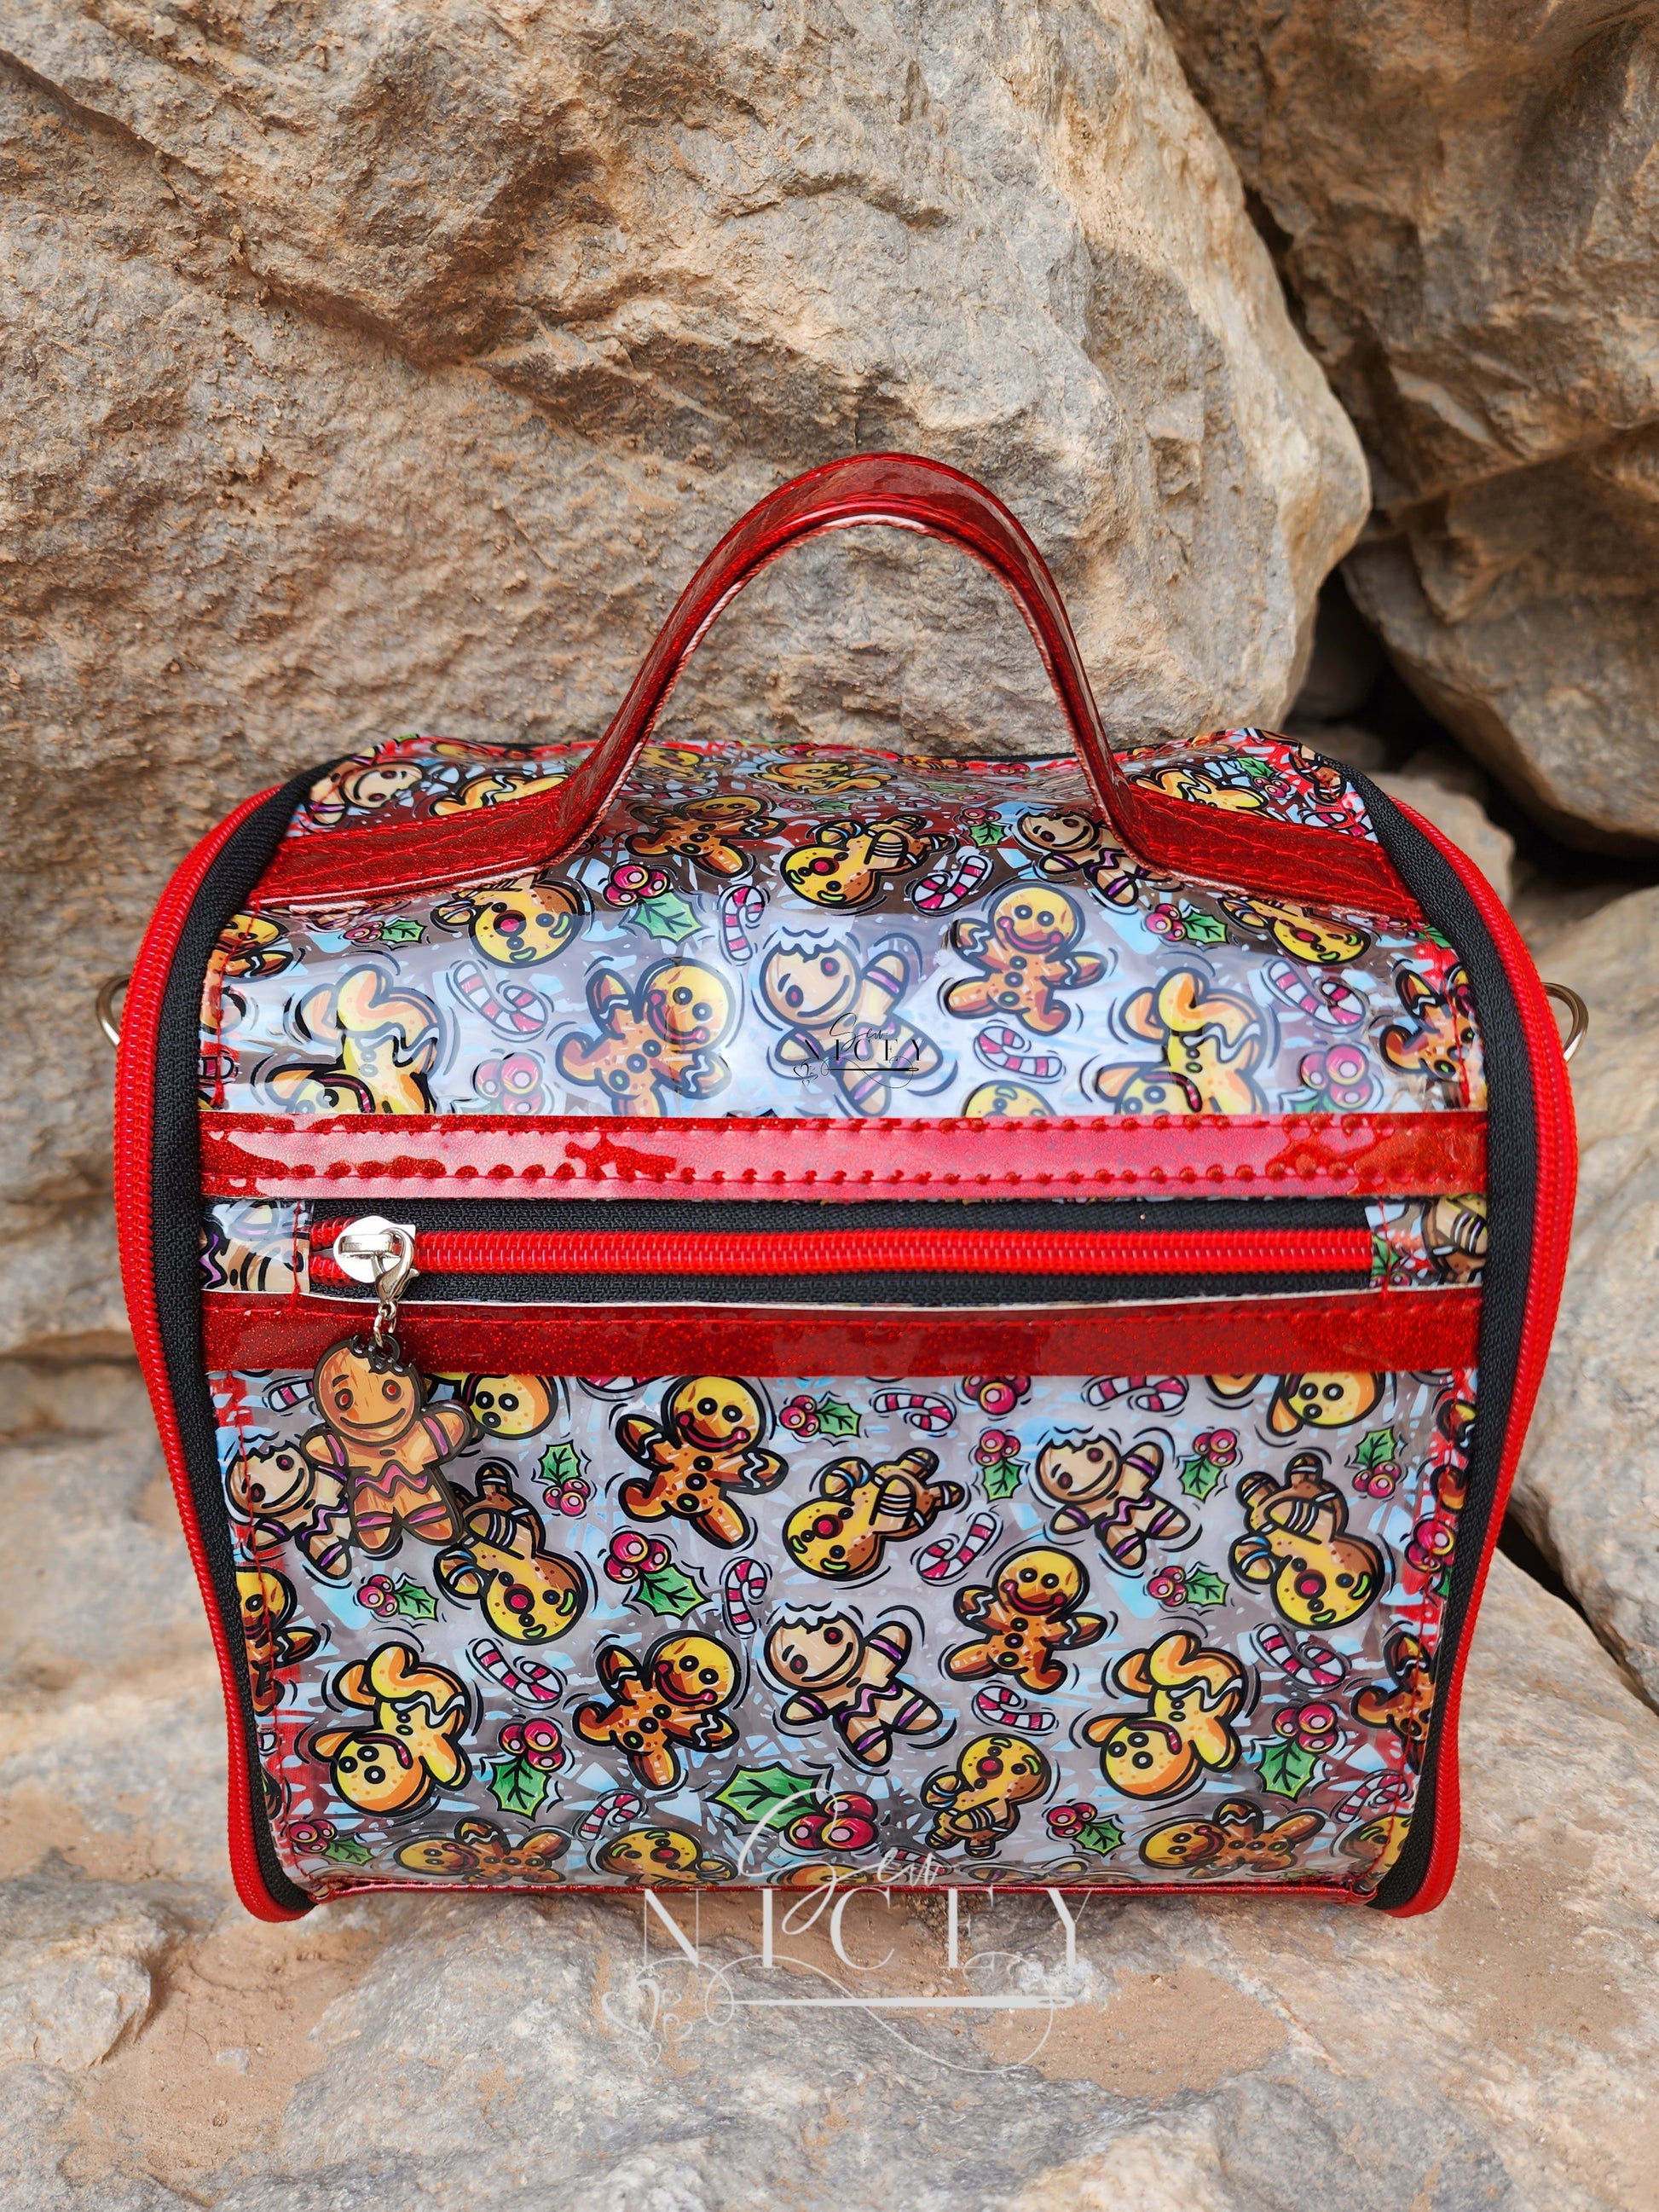 Cruisin' with Mickey Travel Sewing Kit – Pixie Dusted Stitches